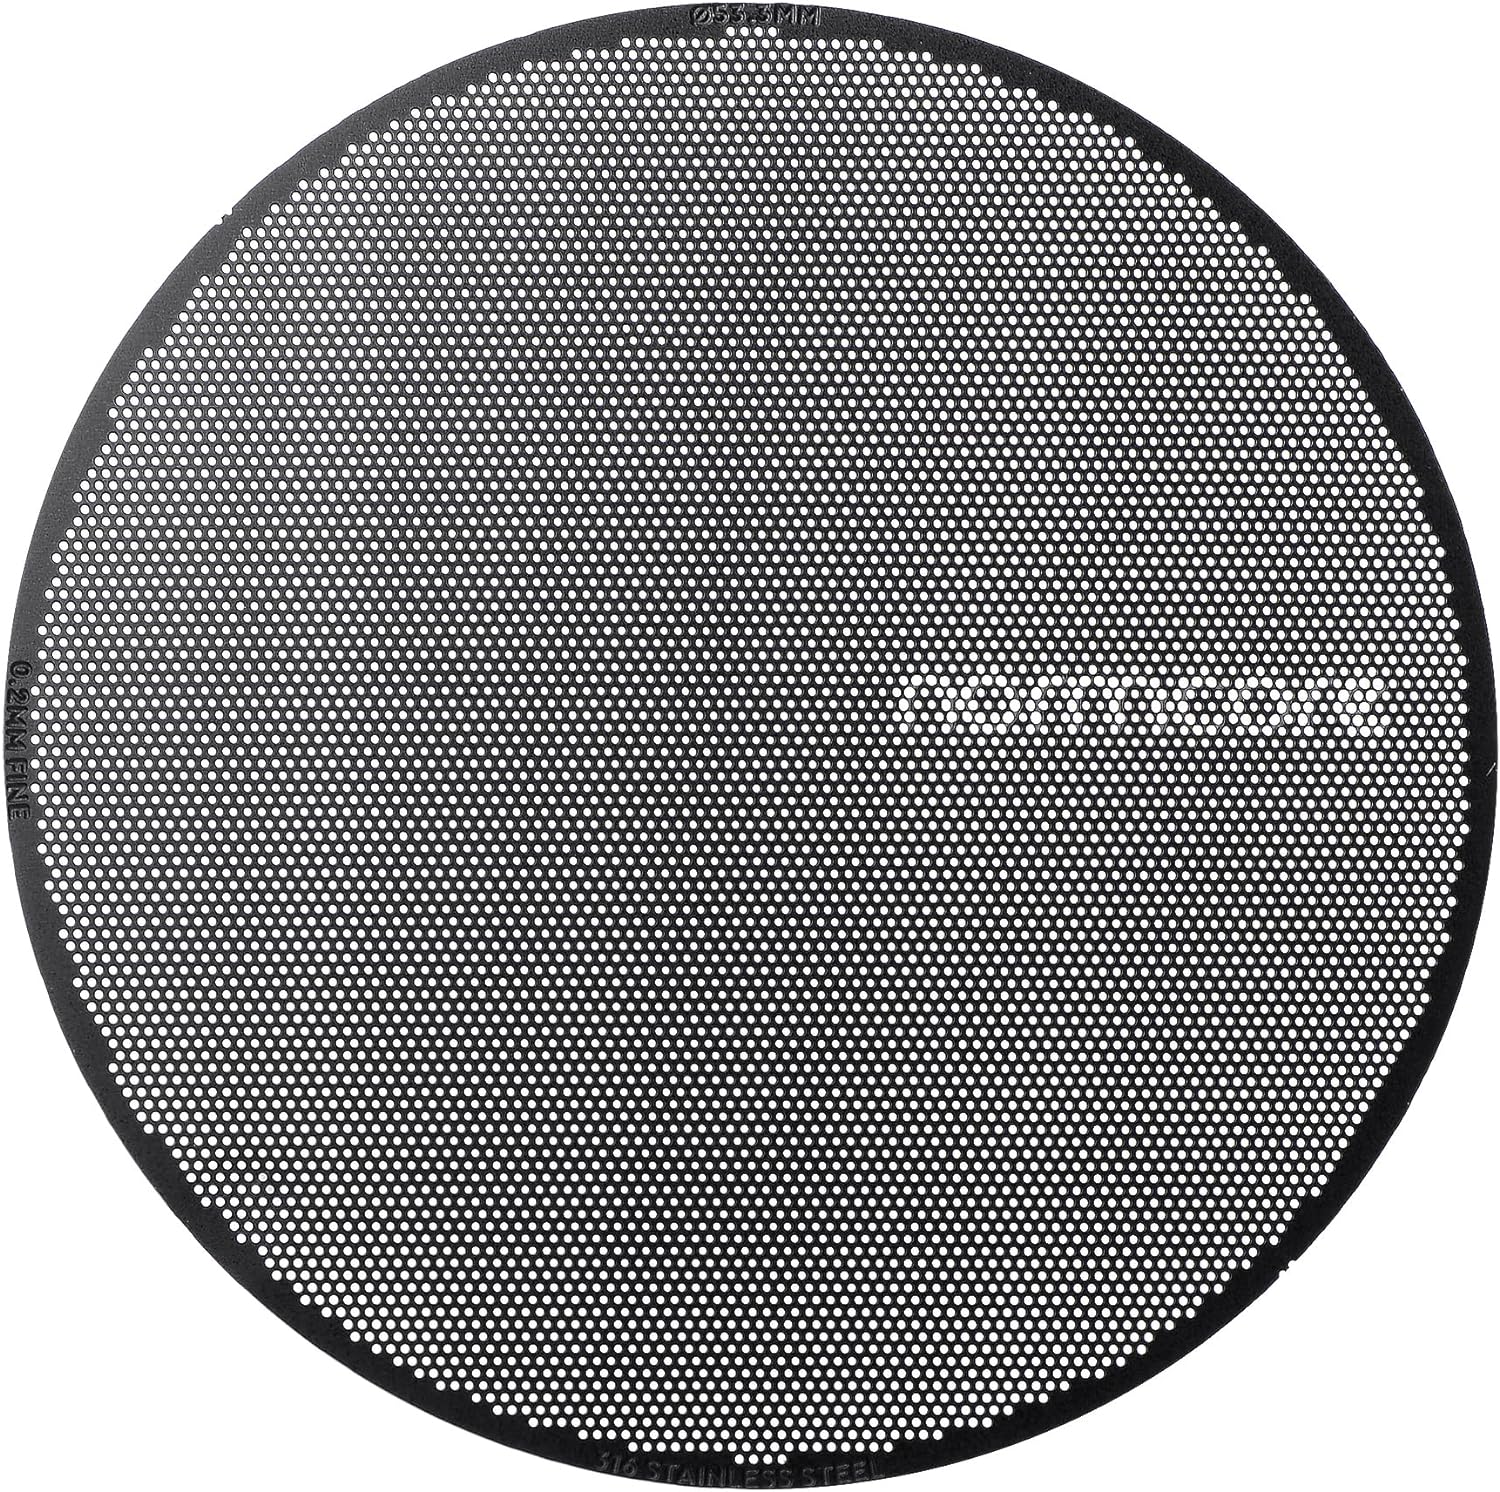 Normcore 0.2 mm Puck Screen 53.3 mm - Titanium PVD Coating - Espresso Strainer for Portafilter - Stainless Steel 316 - Reusable Puck Filter - Coffee Portafilter Lower Shower Strainer